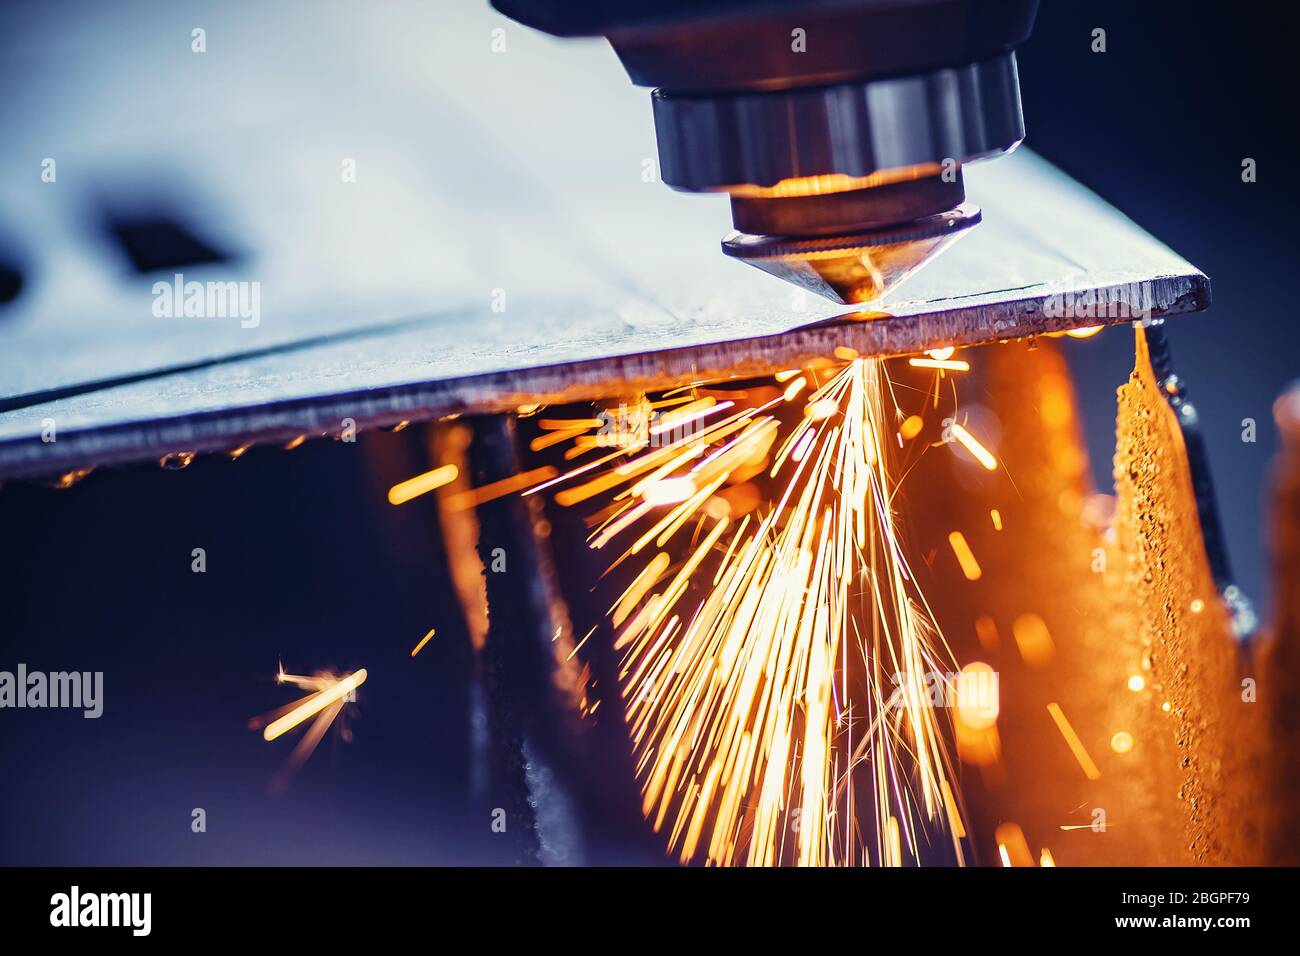 Cnc Gas Cutting Metal Sheet Sparks Fly Blue Steel Color Modern Industrial Technology Stock Photo Alamy